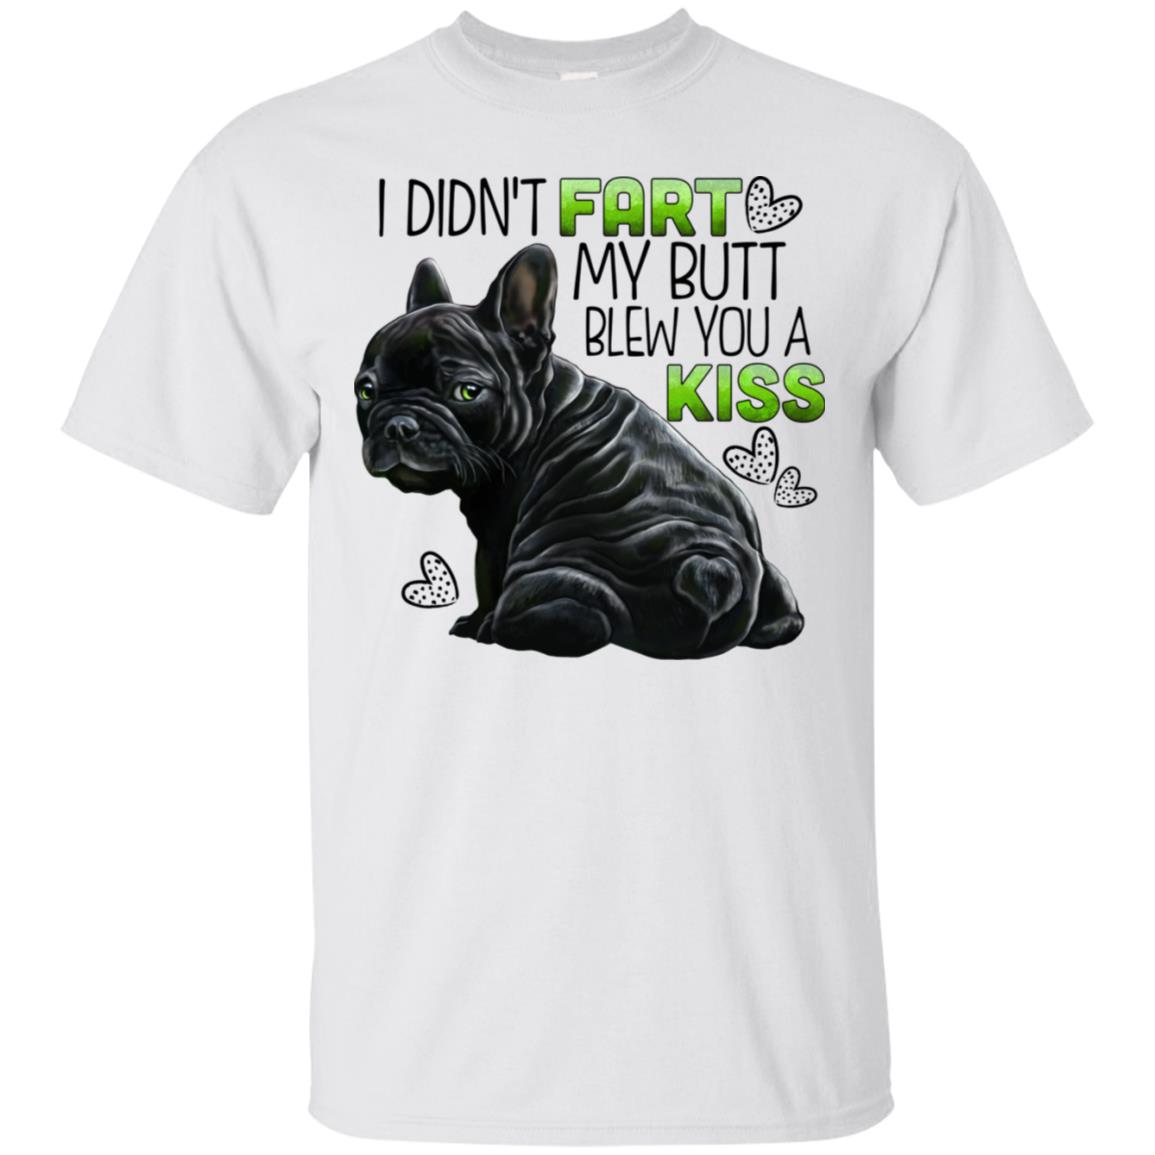 Black French bulldog Funny T-shirt, I didn't fart my butt blew you a kiss - GoneBold.gift